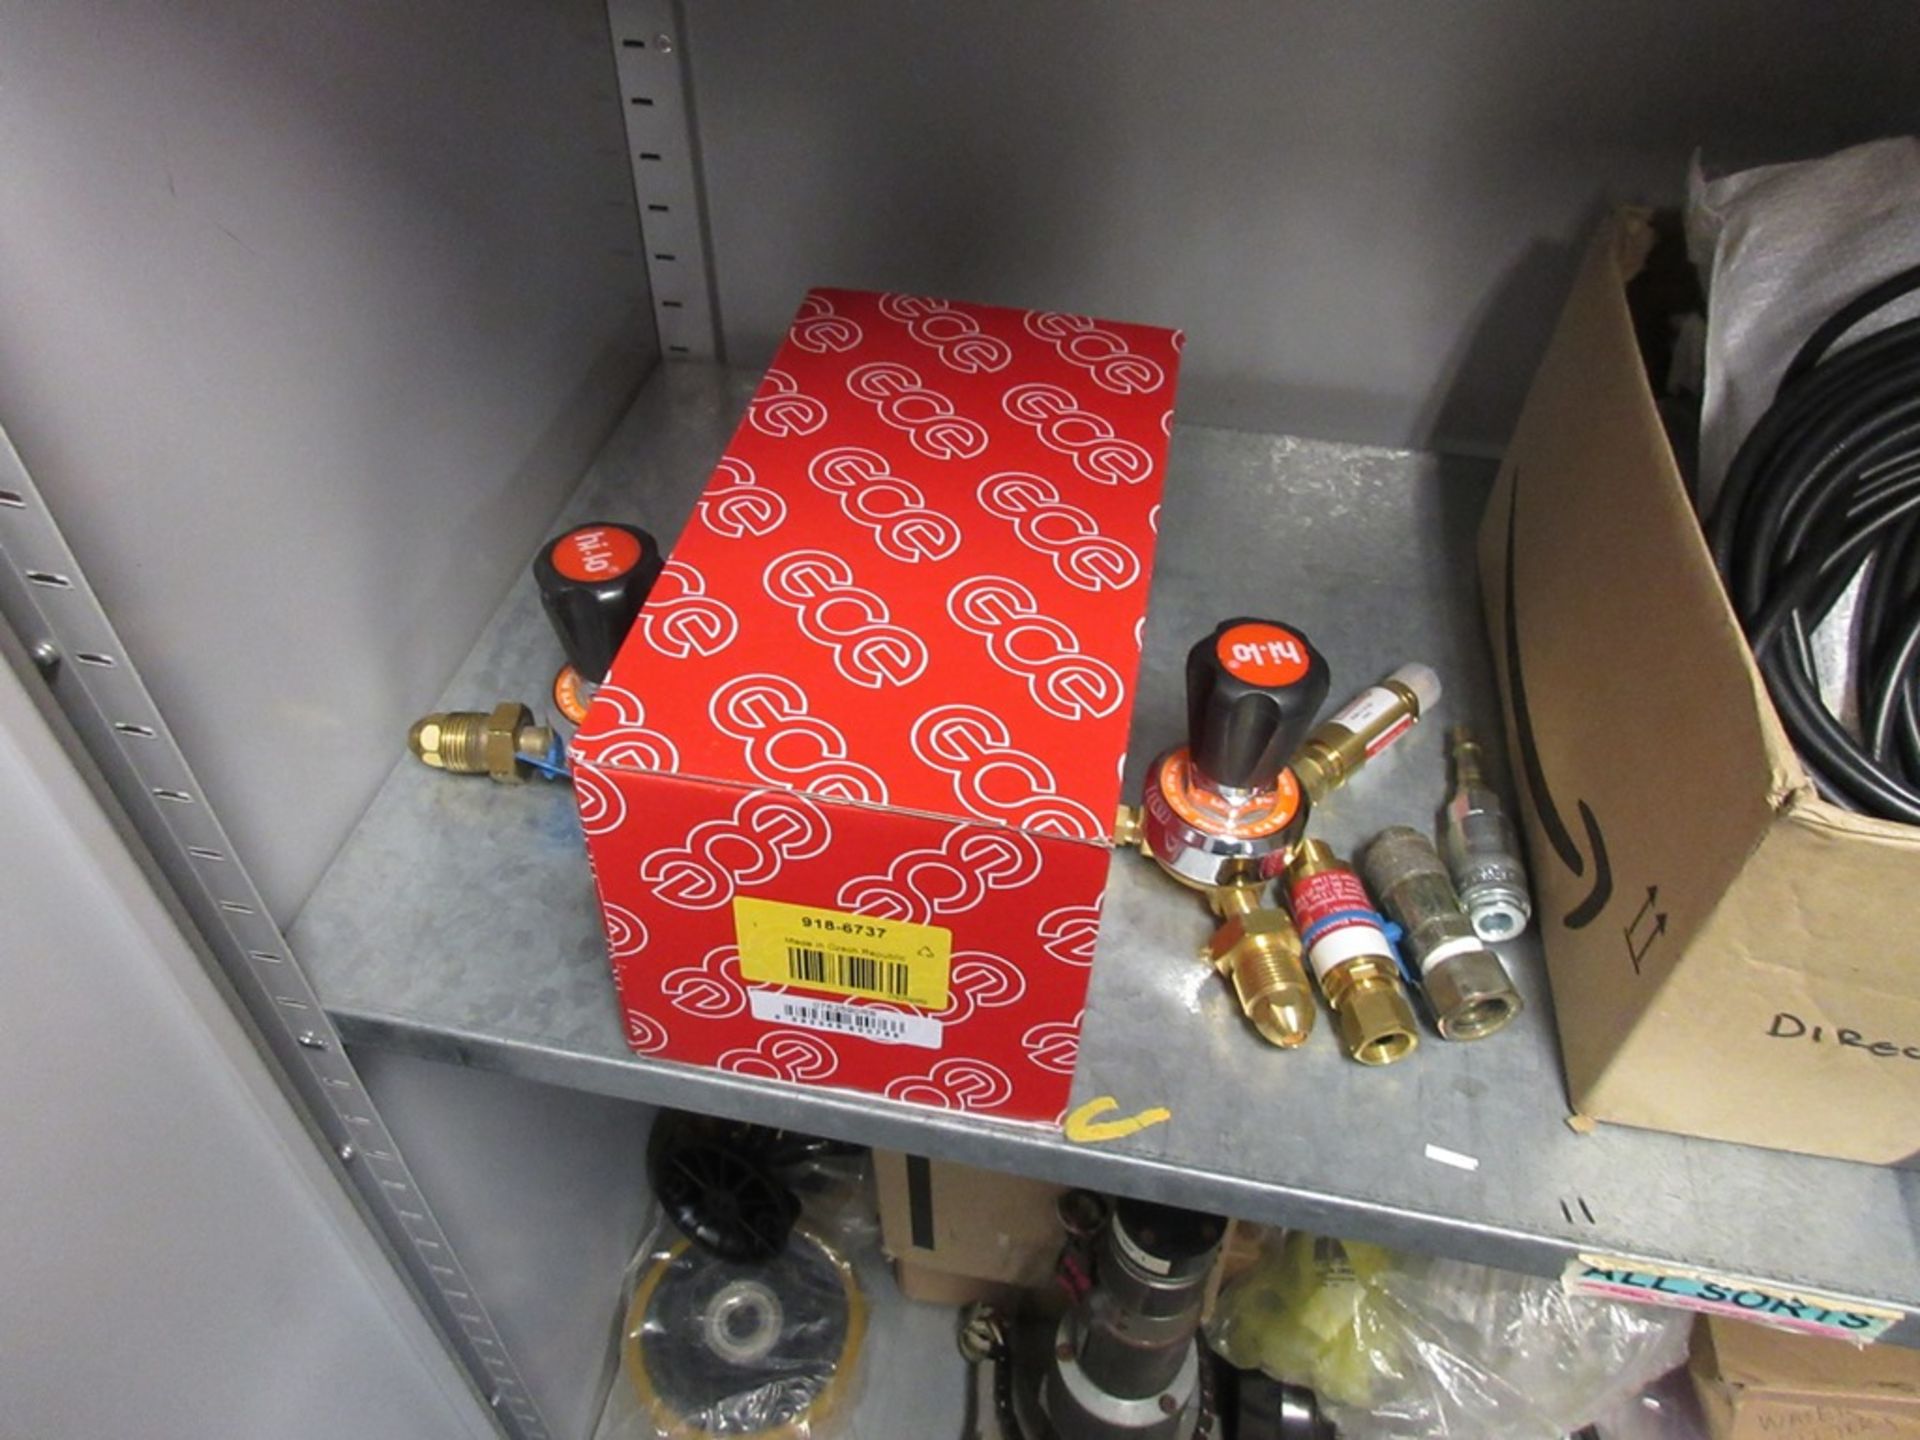 Cupboard and contents including gas regulators, power supply units, electrode connectors, janes, - Image 6 of 9